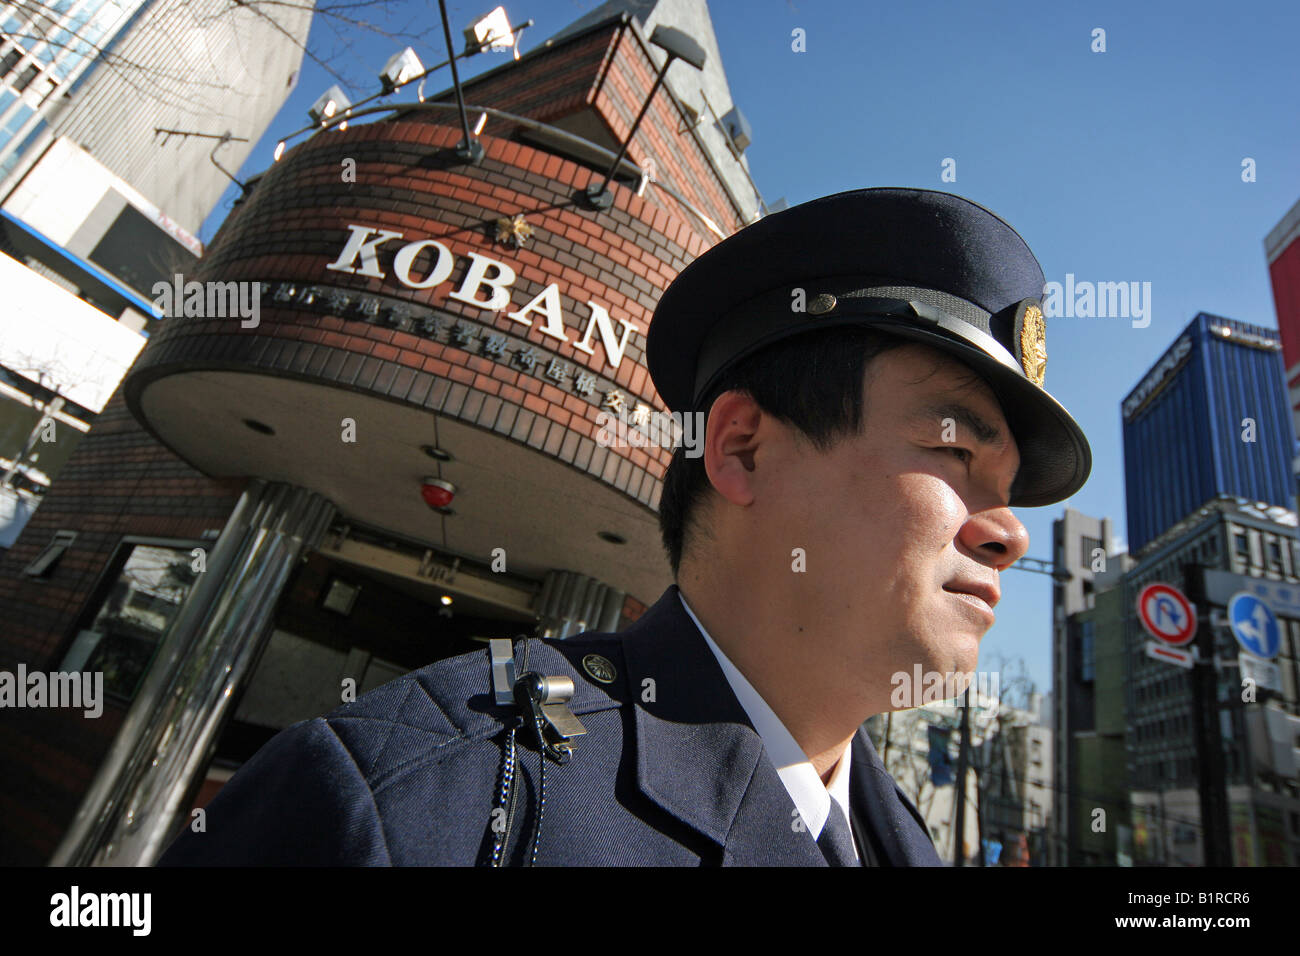 Koban Police Officer by his box in Ginza Tokyo Japan Stock Photo